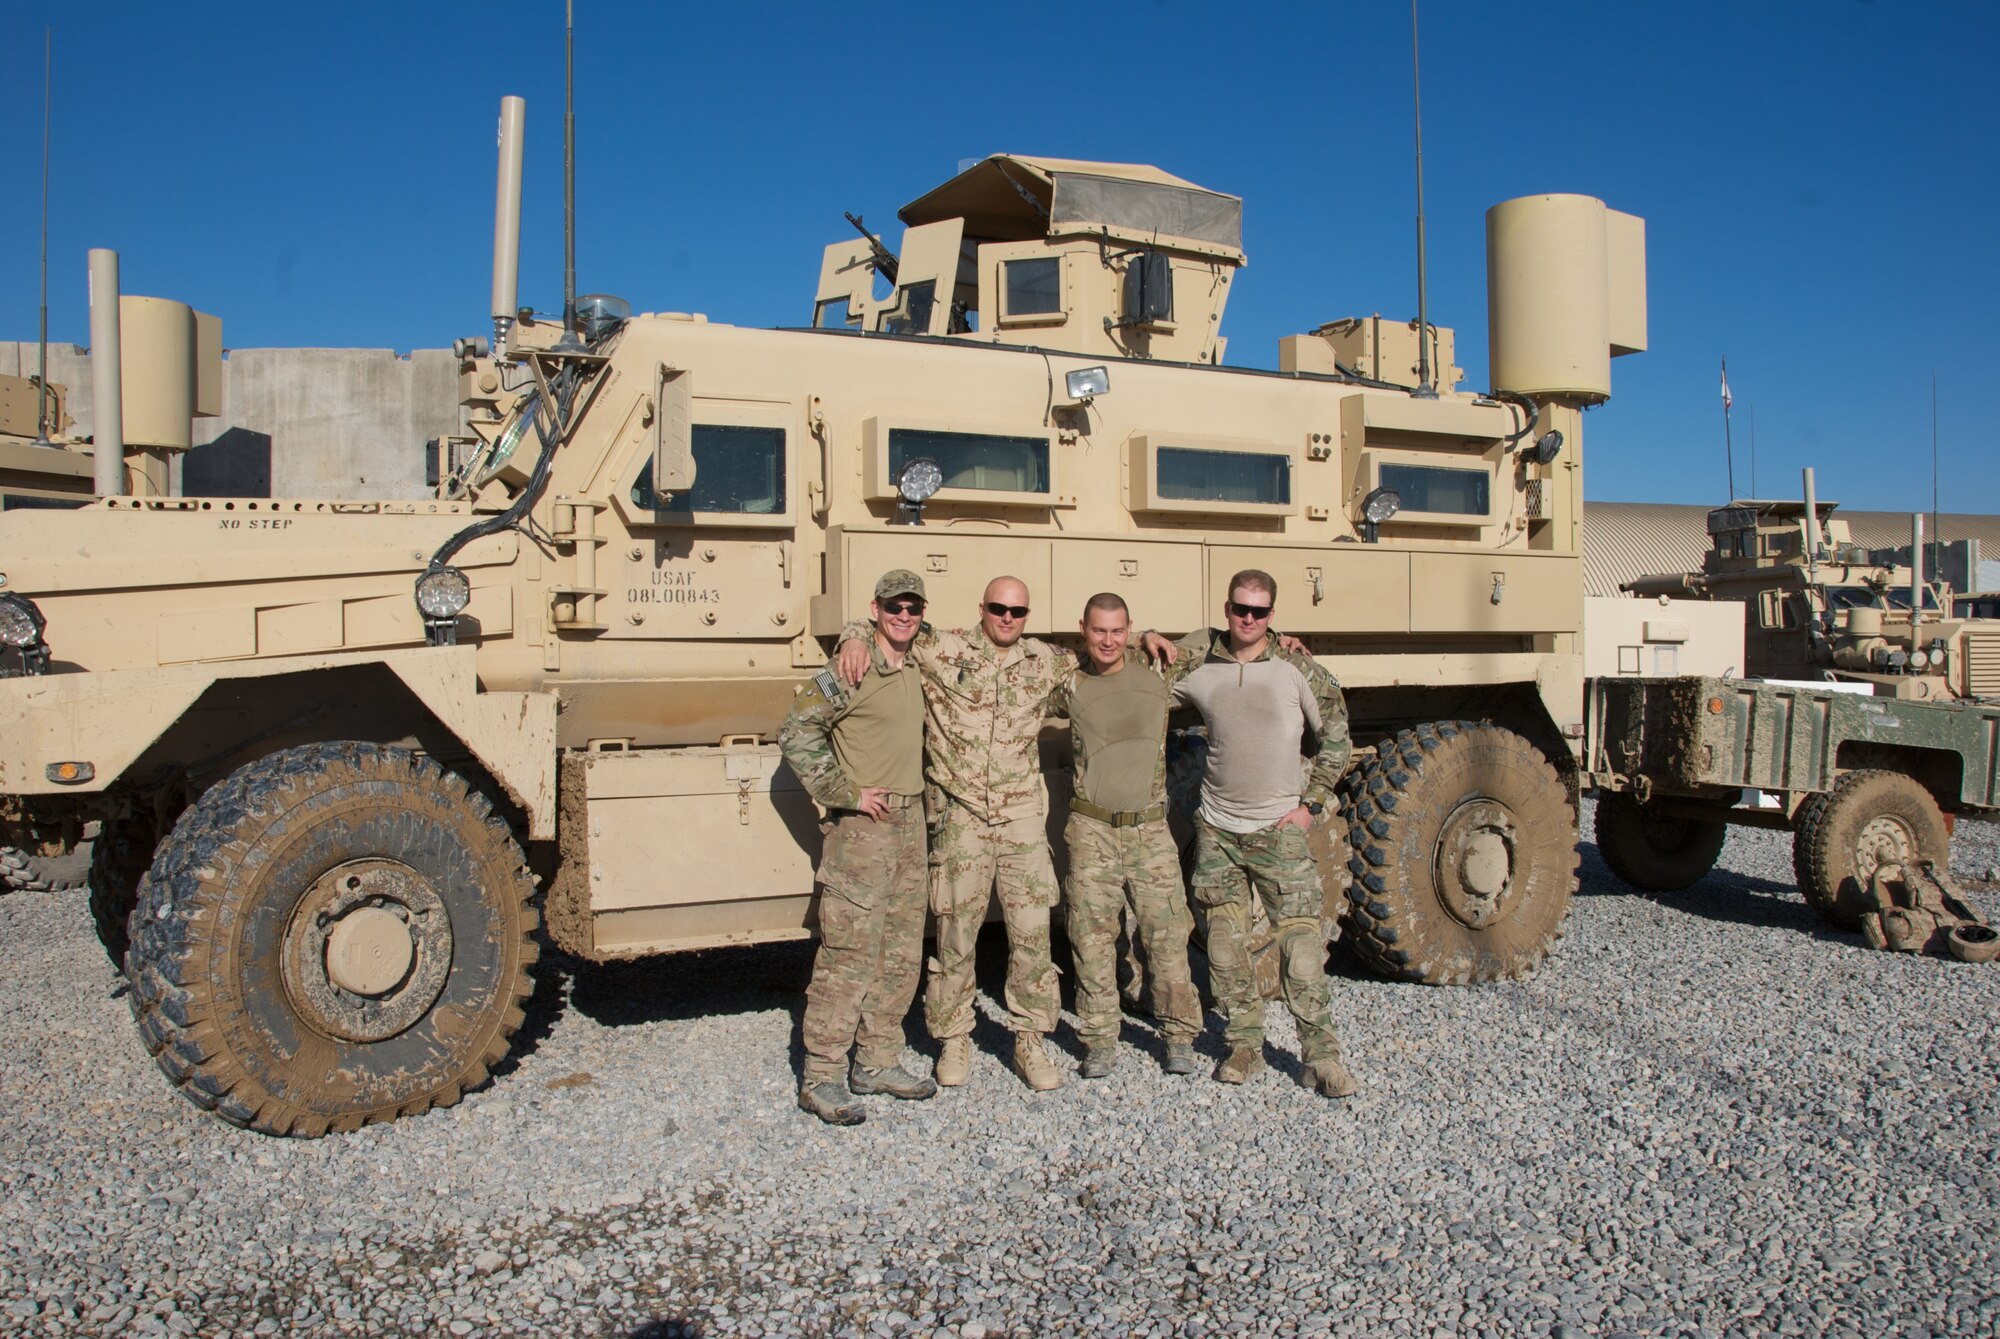 Tech. Sgt. Jeremy Miller, 509th Civil Engineer Squadron NCO in charge of EOD, third from the left, deployed to Southwest Asia from Sept. 1, 2013 to May 1, 2014. Miller deployed with a coalition force and joint force of U.S. Army, U.S. Air Force and Romanian Army Service members to train Afghan soldiers on various EOD techniques as part of a coalition interoperability training mission with the Afghan National Army. (U.S. Air Force photo by Tech. Sgt. Jeremy Miller/Released)